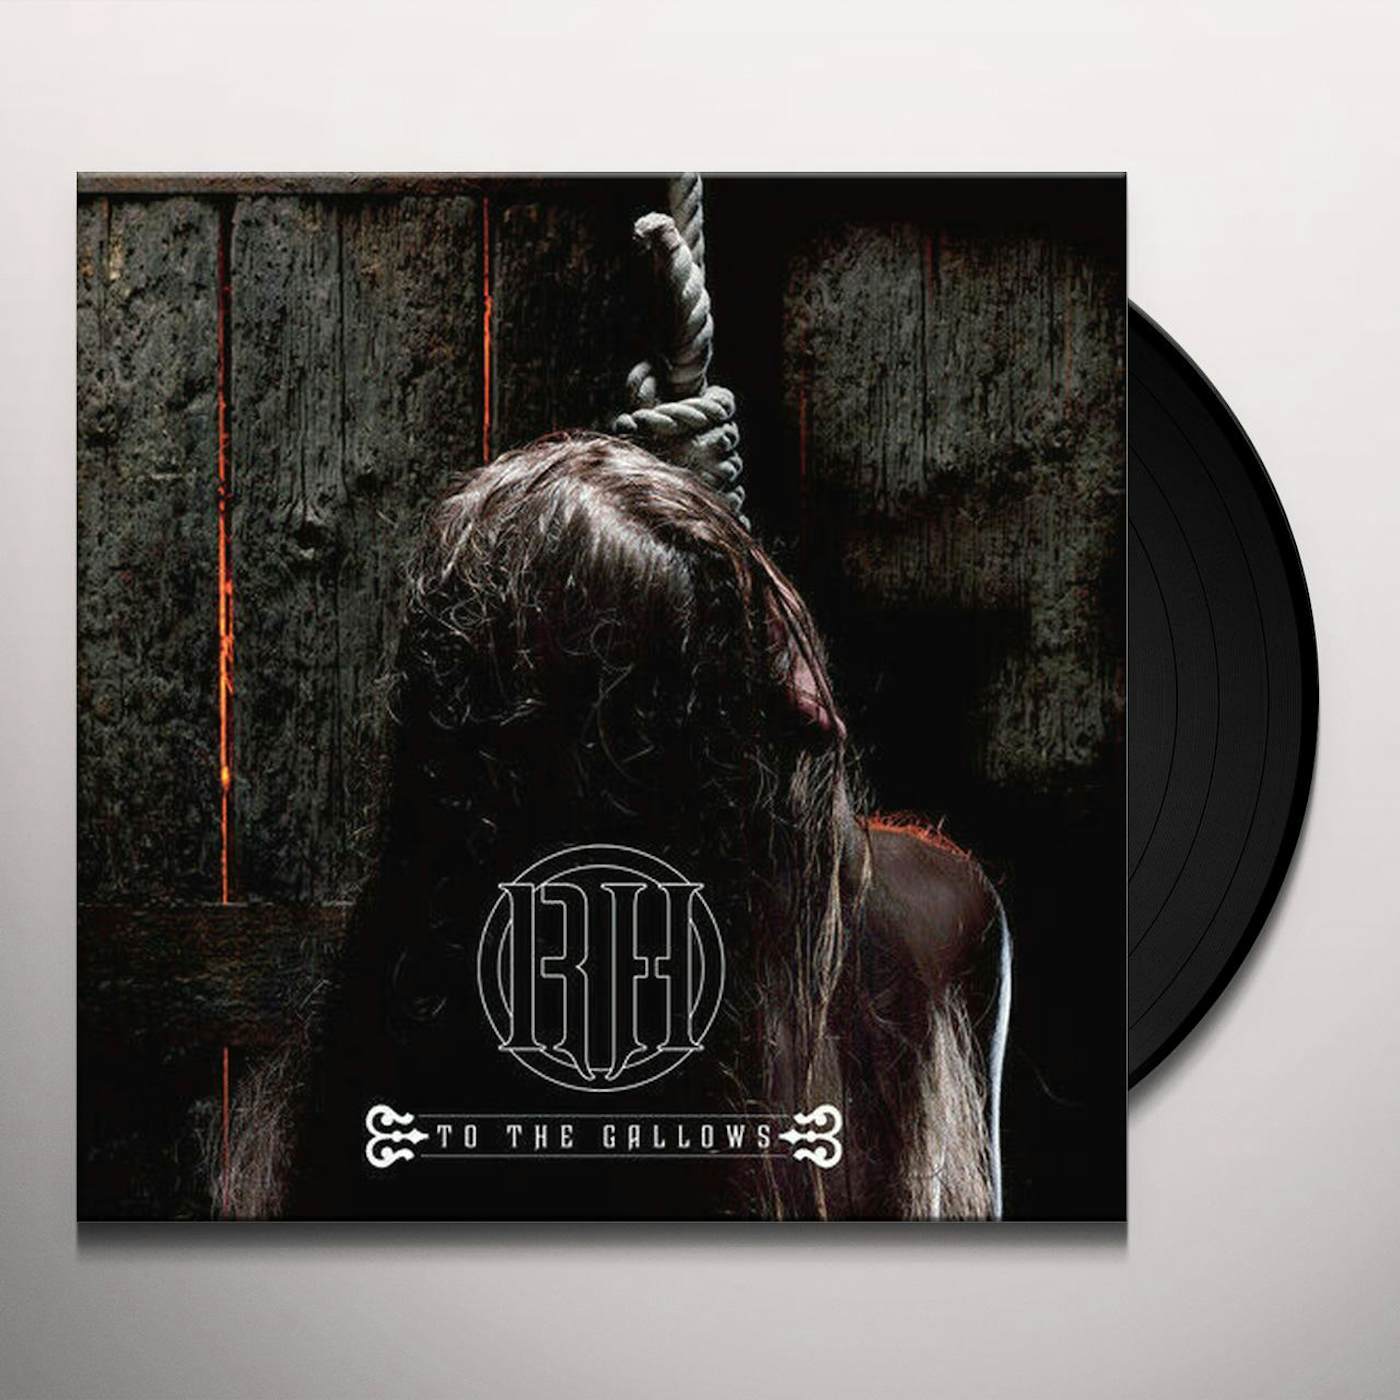 Raise Hell To The Gallows Vinyl Record